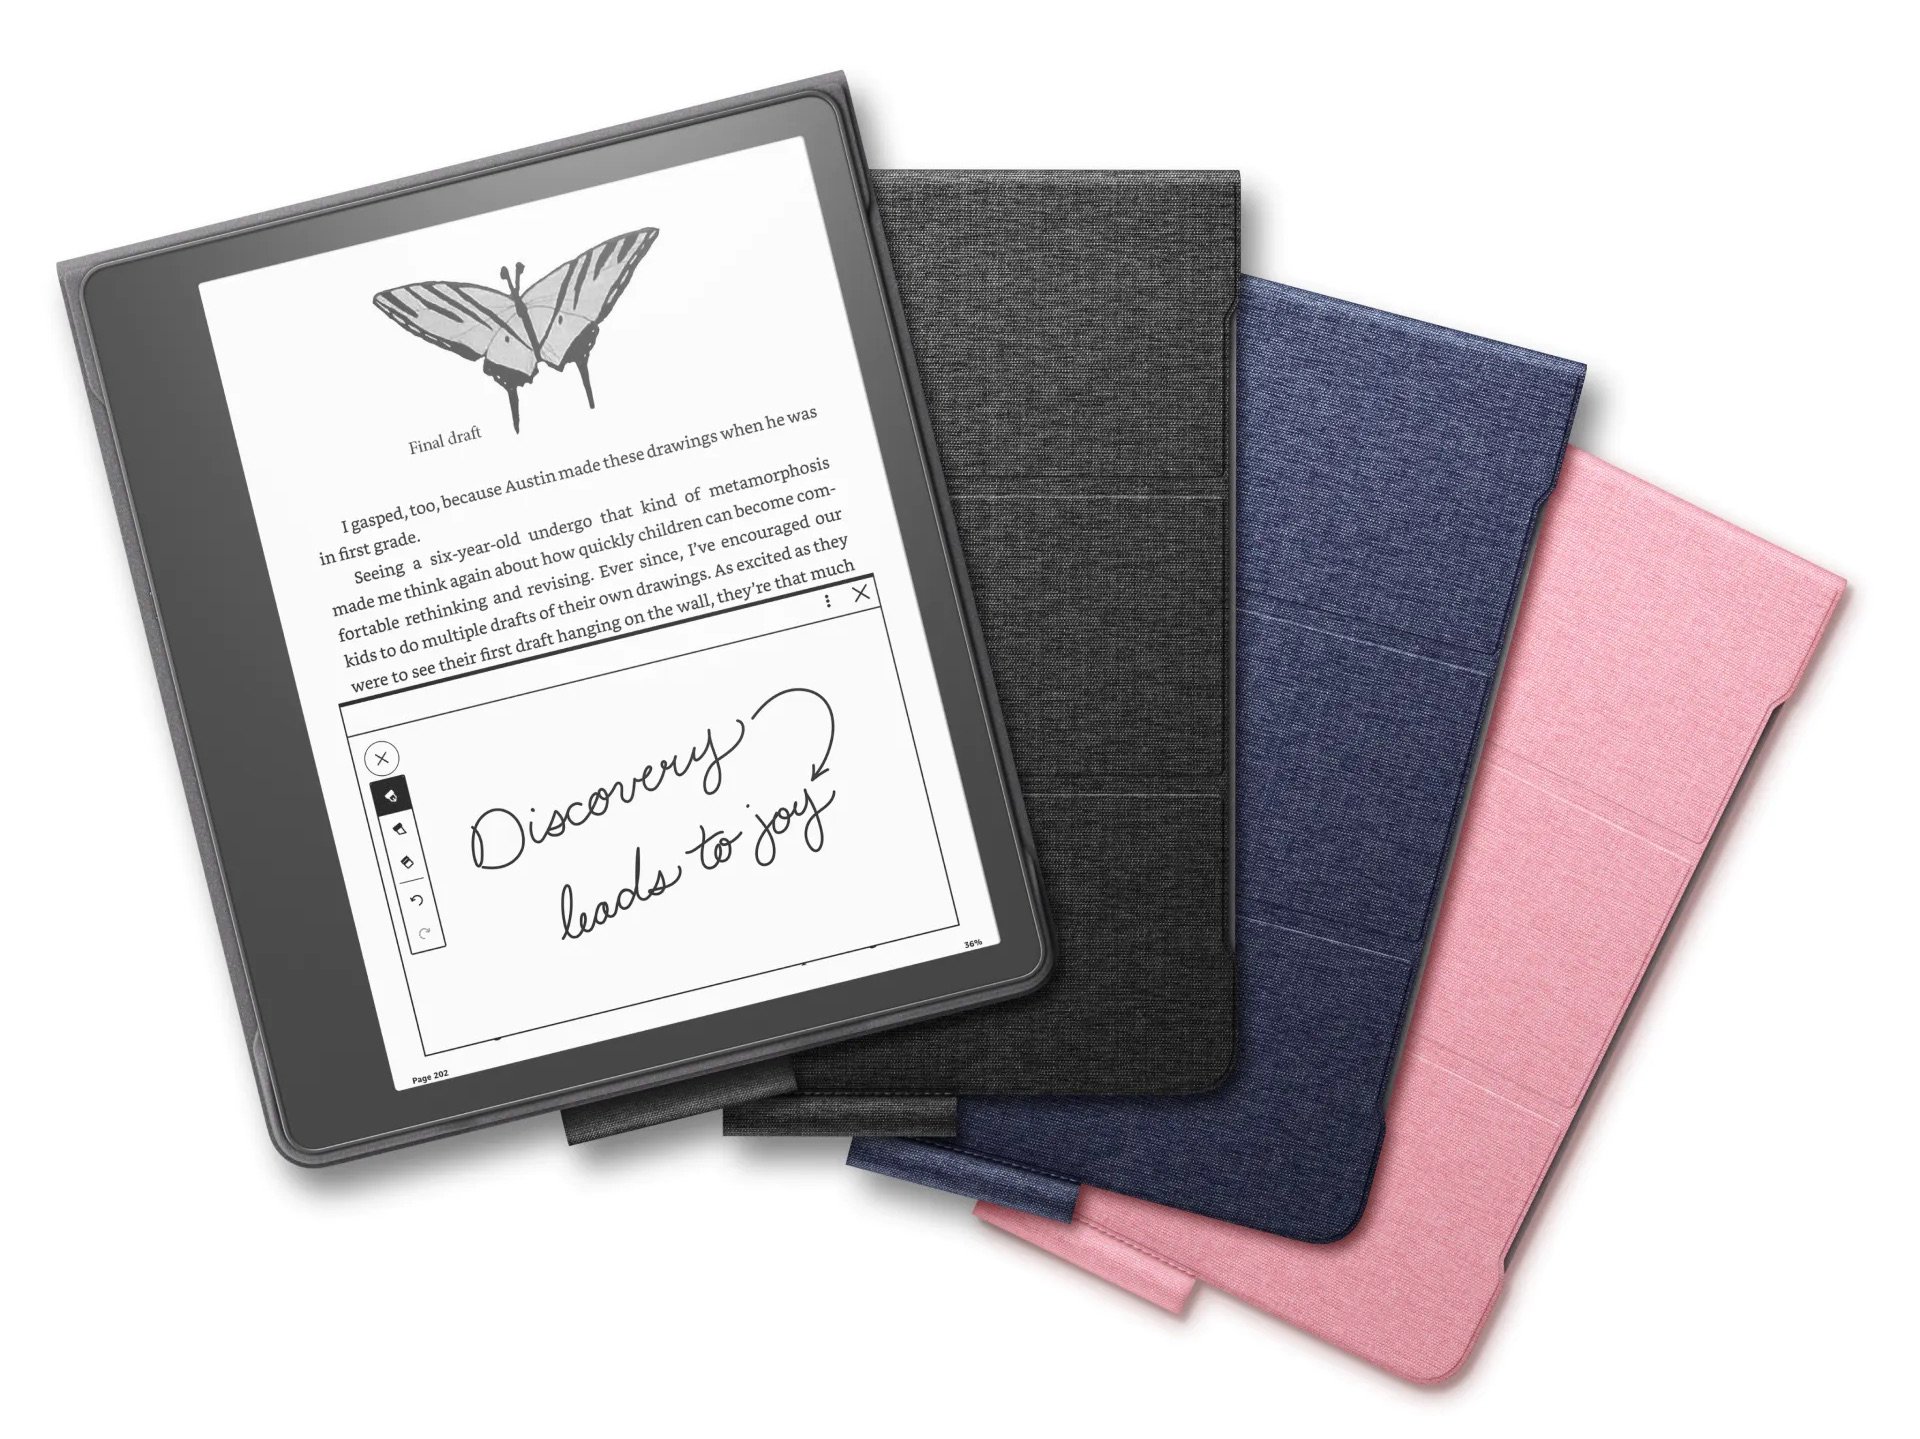 Amazon Kindle Scribe is the first Kindle that lets you write and draw